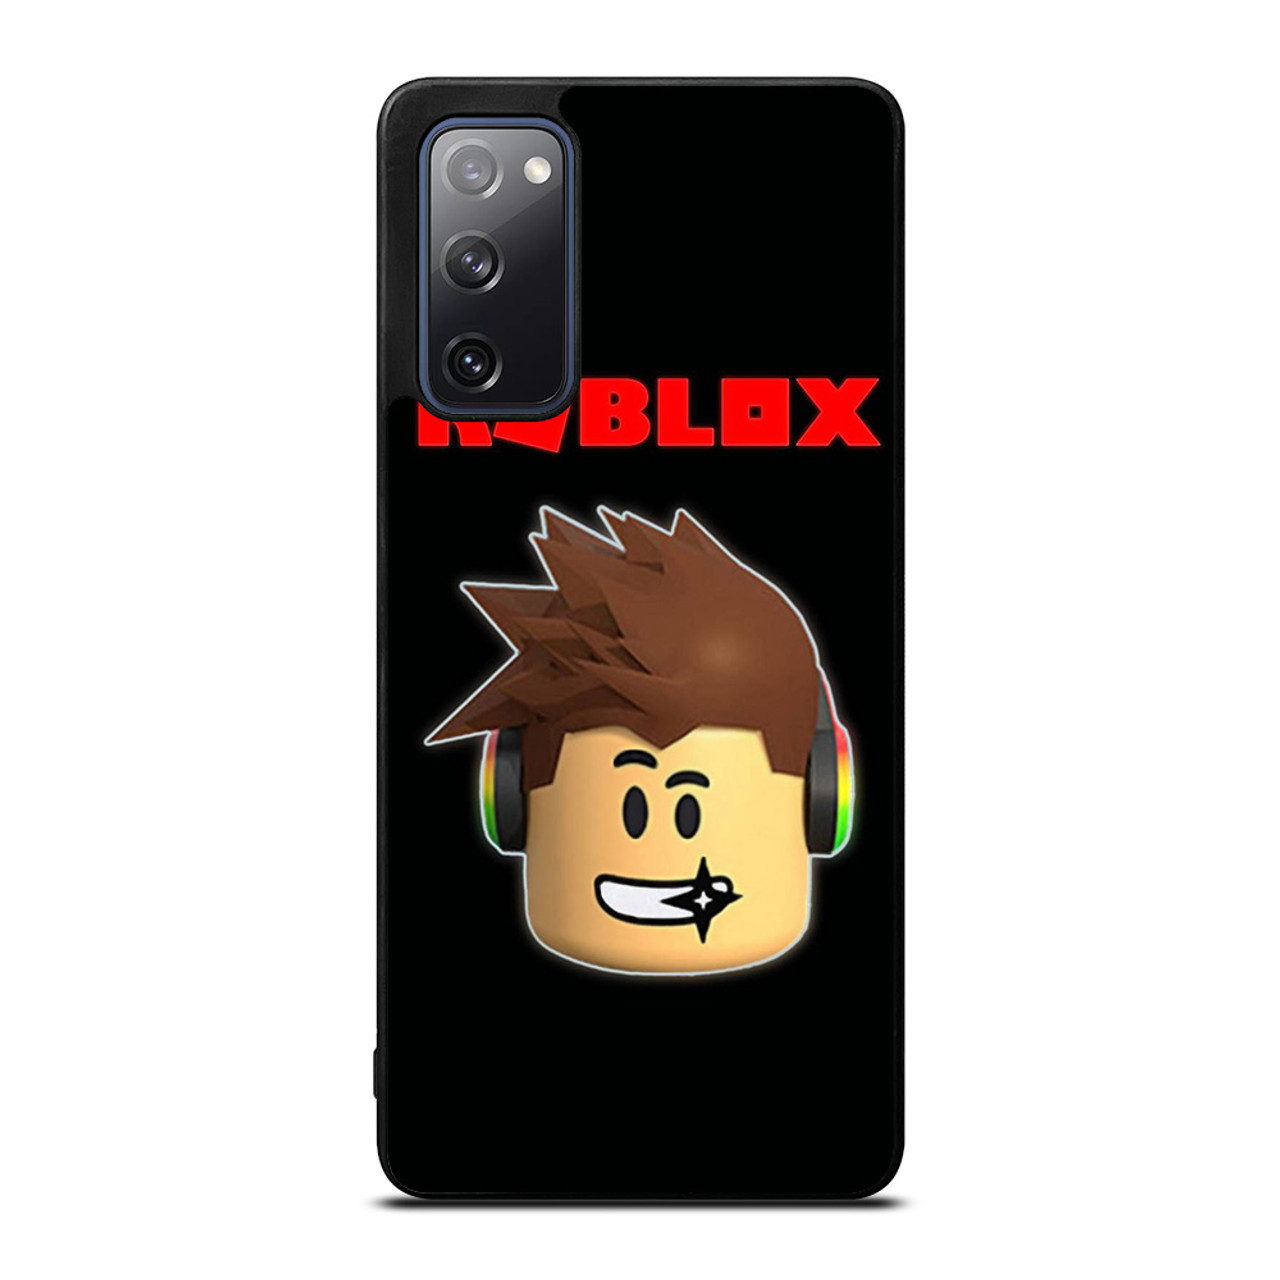 https://cdn11.bigcommerce.com/s-i3fxbqbw58/images/stencil/1280x1280/products/88036/230404/ROBLOX%20GAME%20ICON__06289.1659499232.jpg?c=1